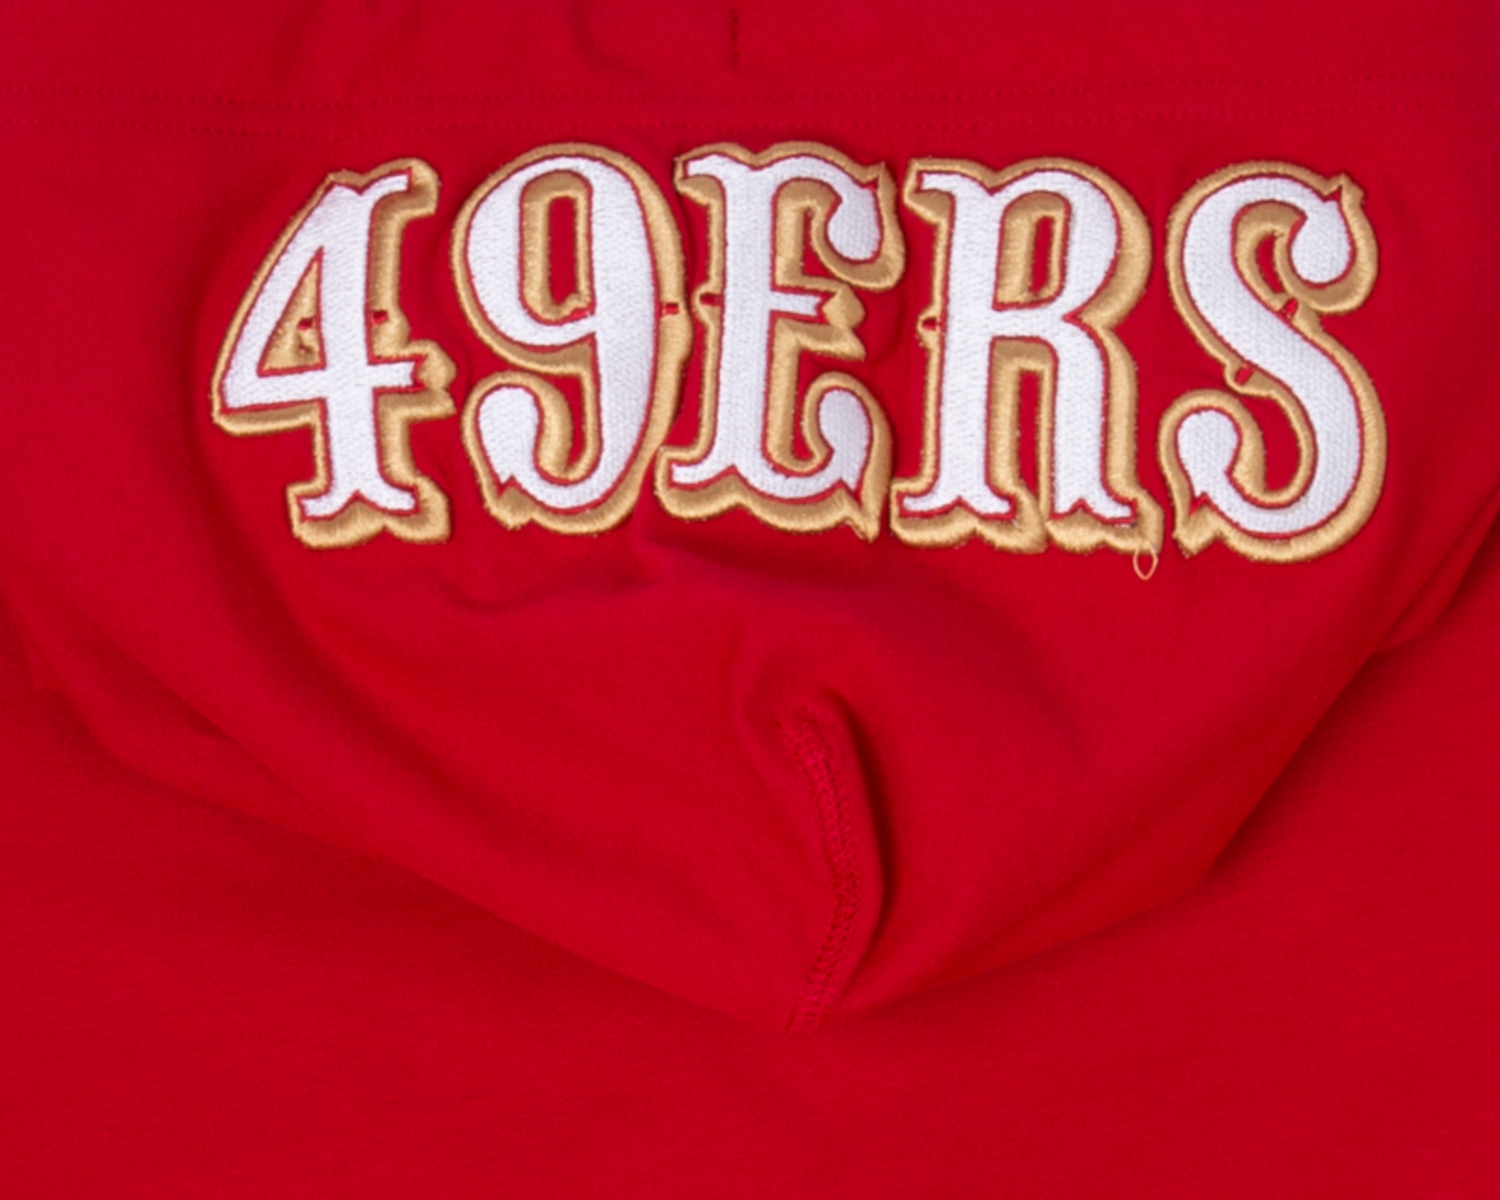 mitchell and ness 49ers hoodie